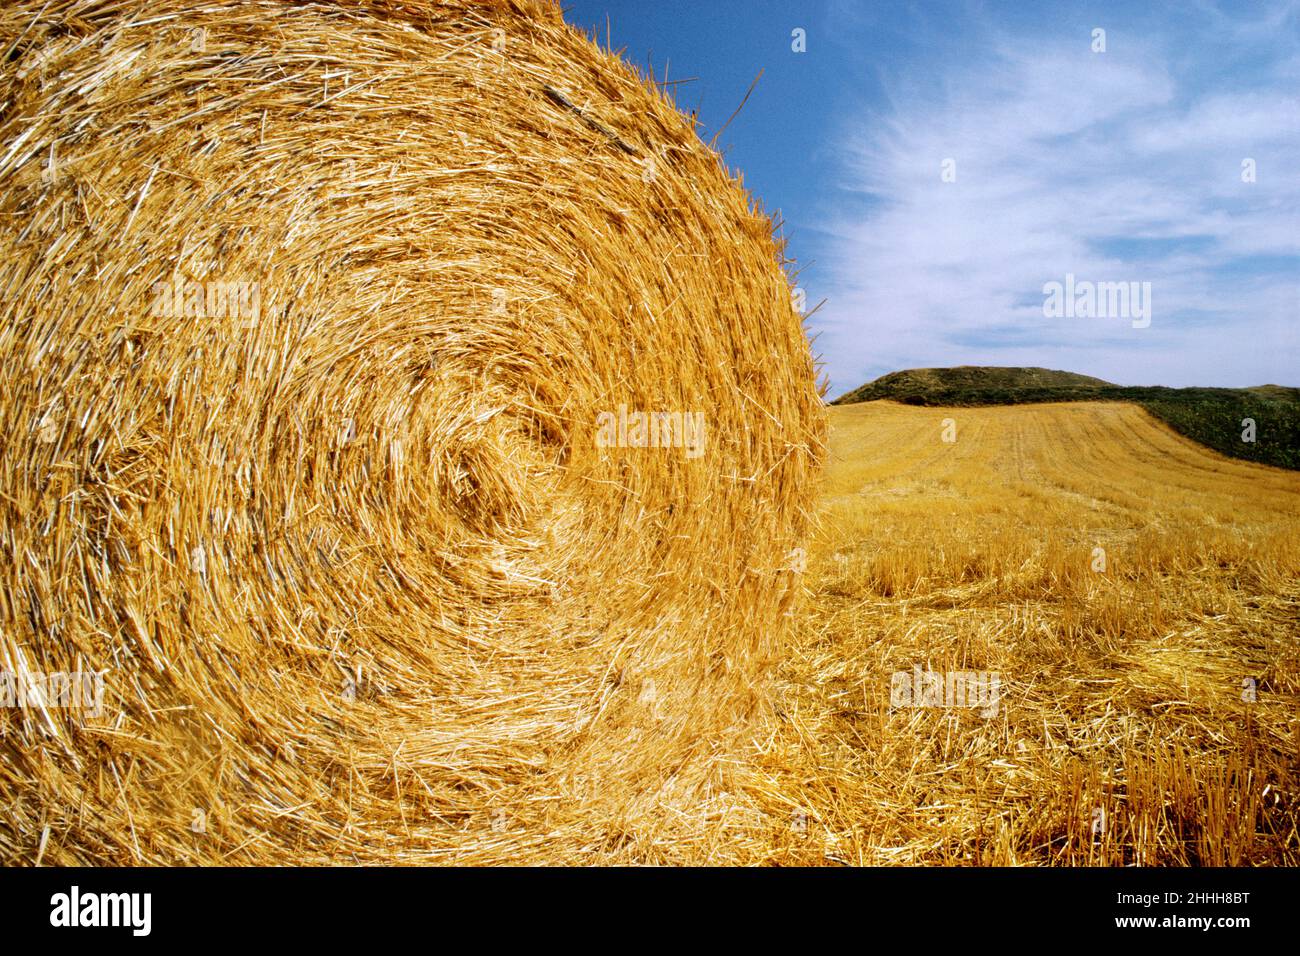 Hay bale in a field of uncut and un-baled hay close up or closeup. Golden rolled hay. Harvesting, agriculture and farmland in Spain Stock Photo